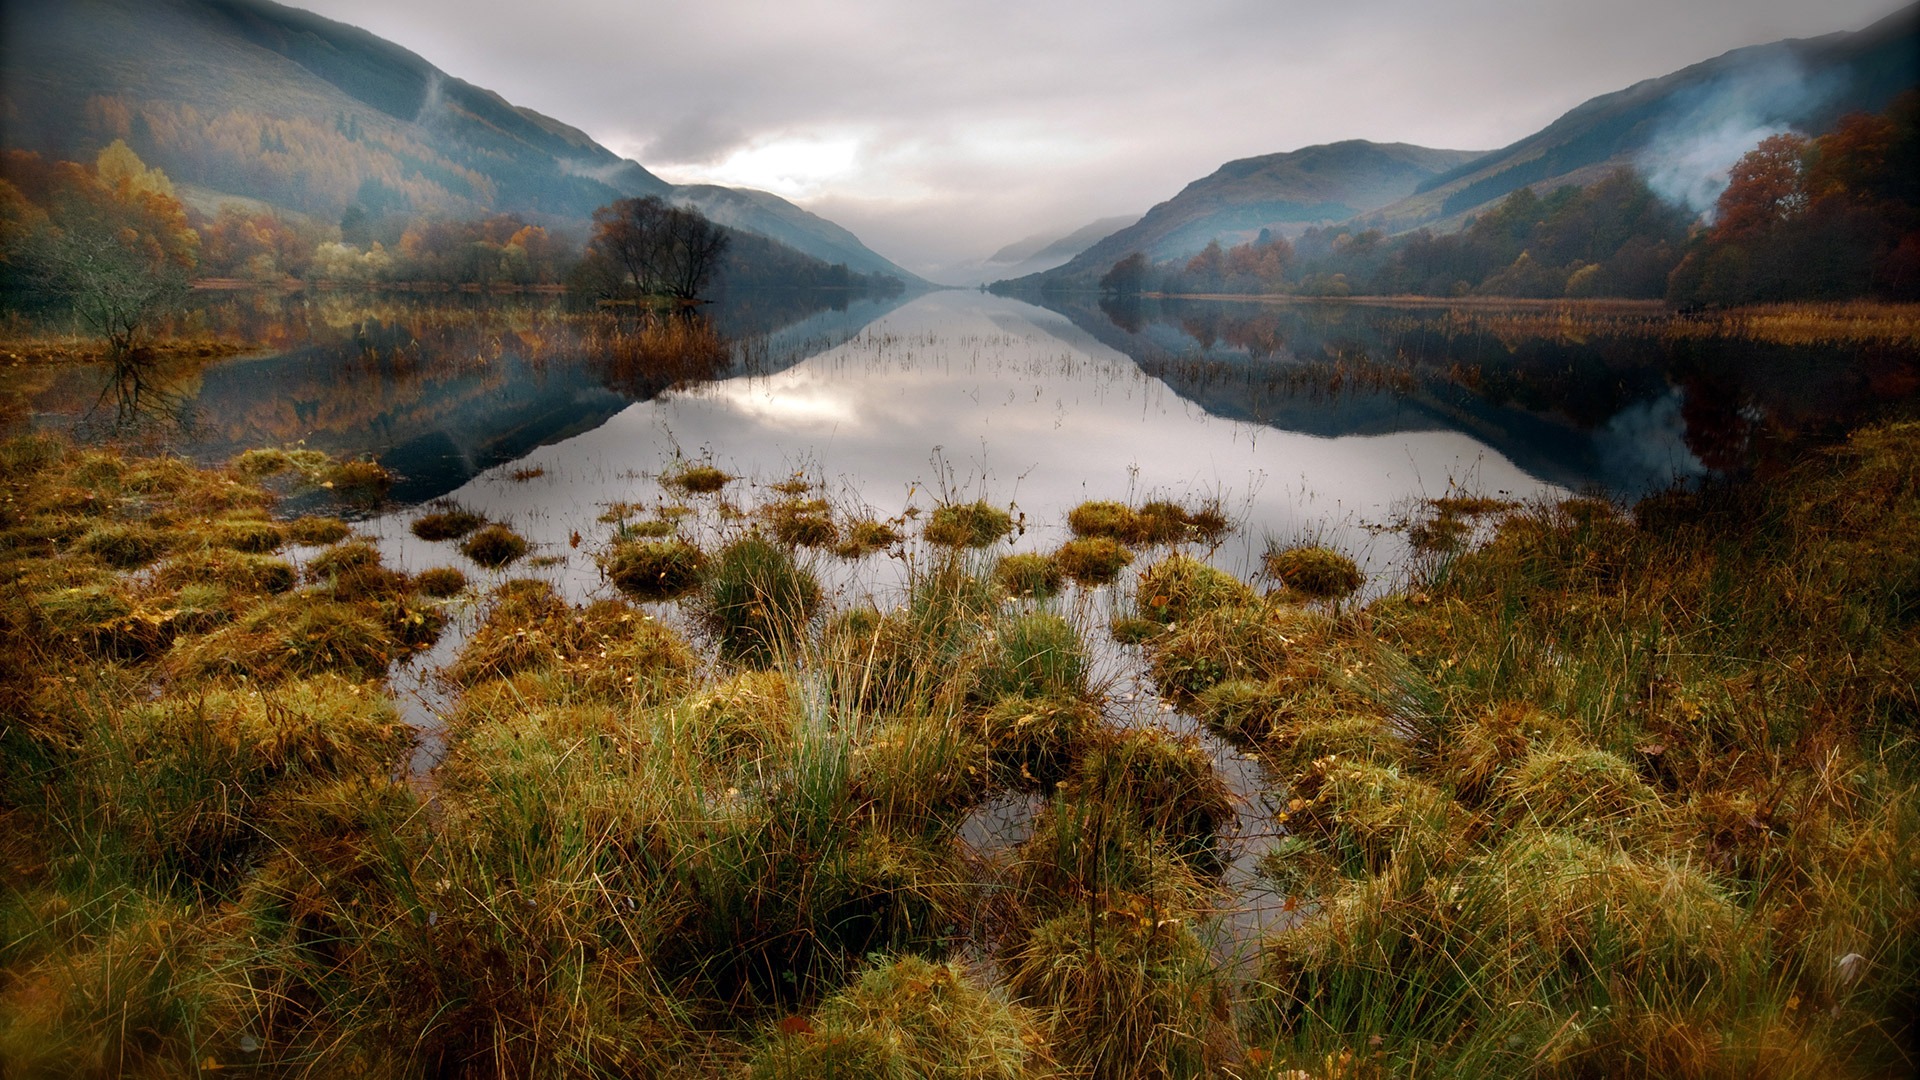 Misty day at Loch Lomond and the Trossachs National Park, Scotland